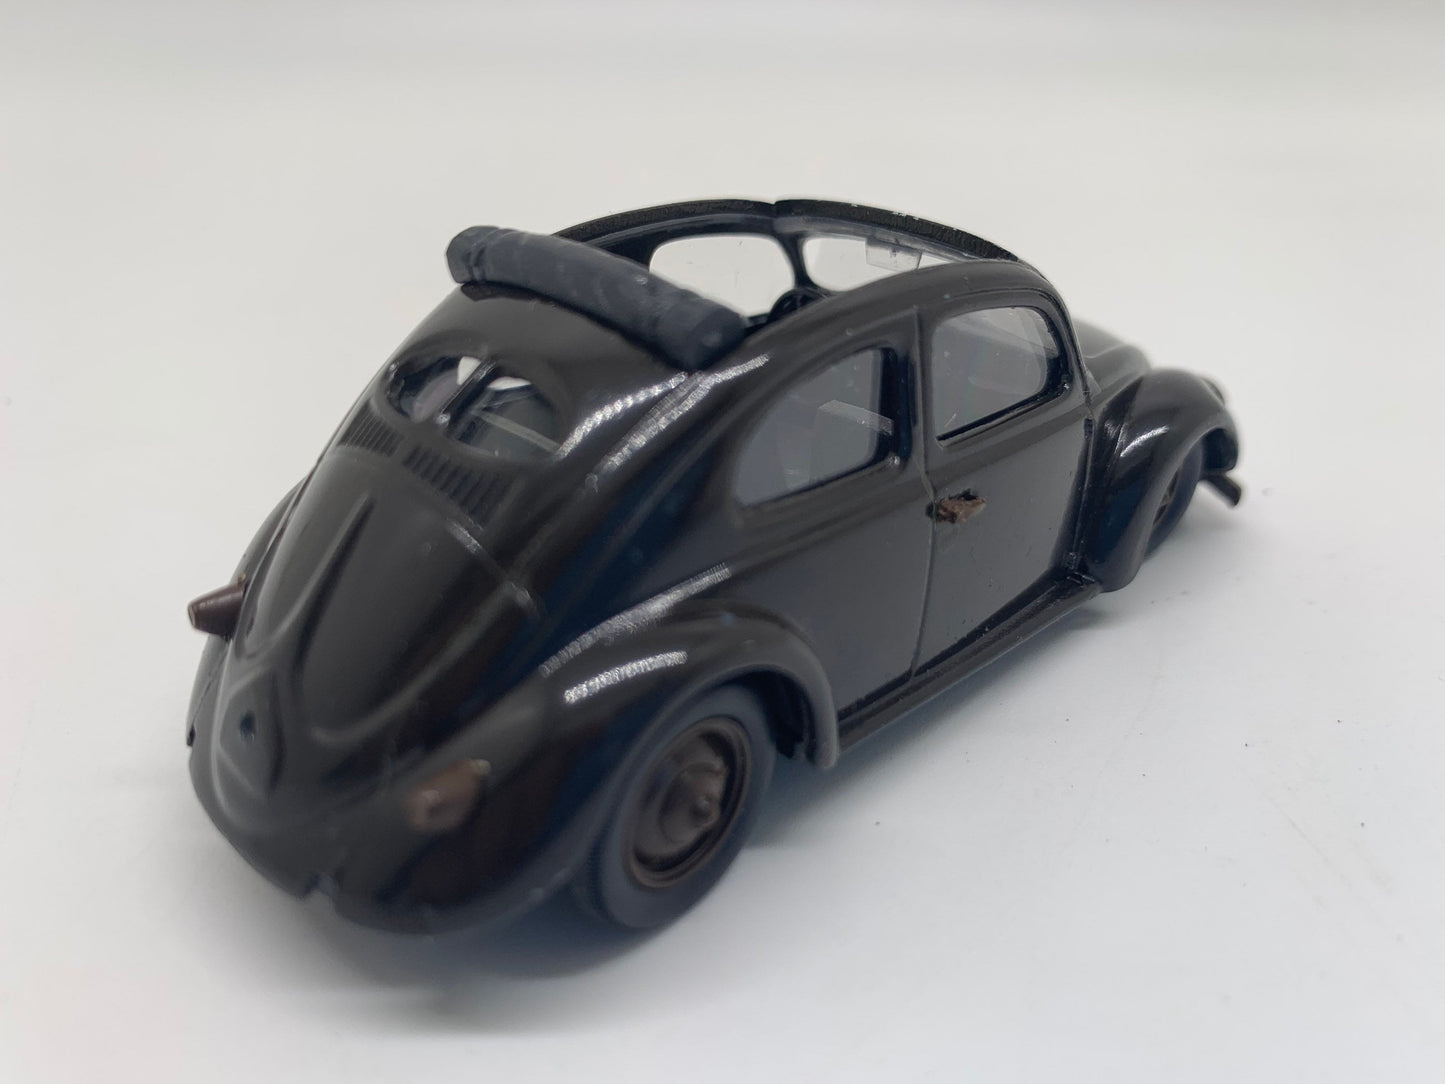 Vitesse Volkswagen 1947 Dark Brown Perfect Birthday Gift Miniature Collectable Scale Model Toy Car